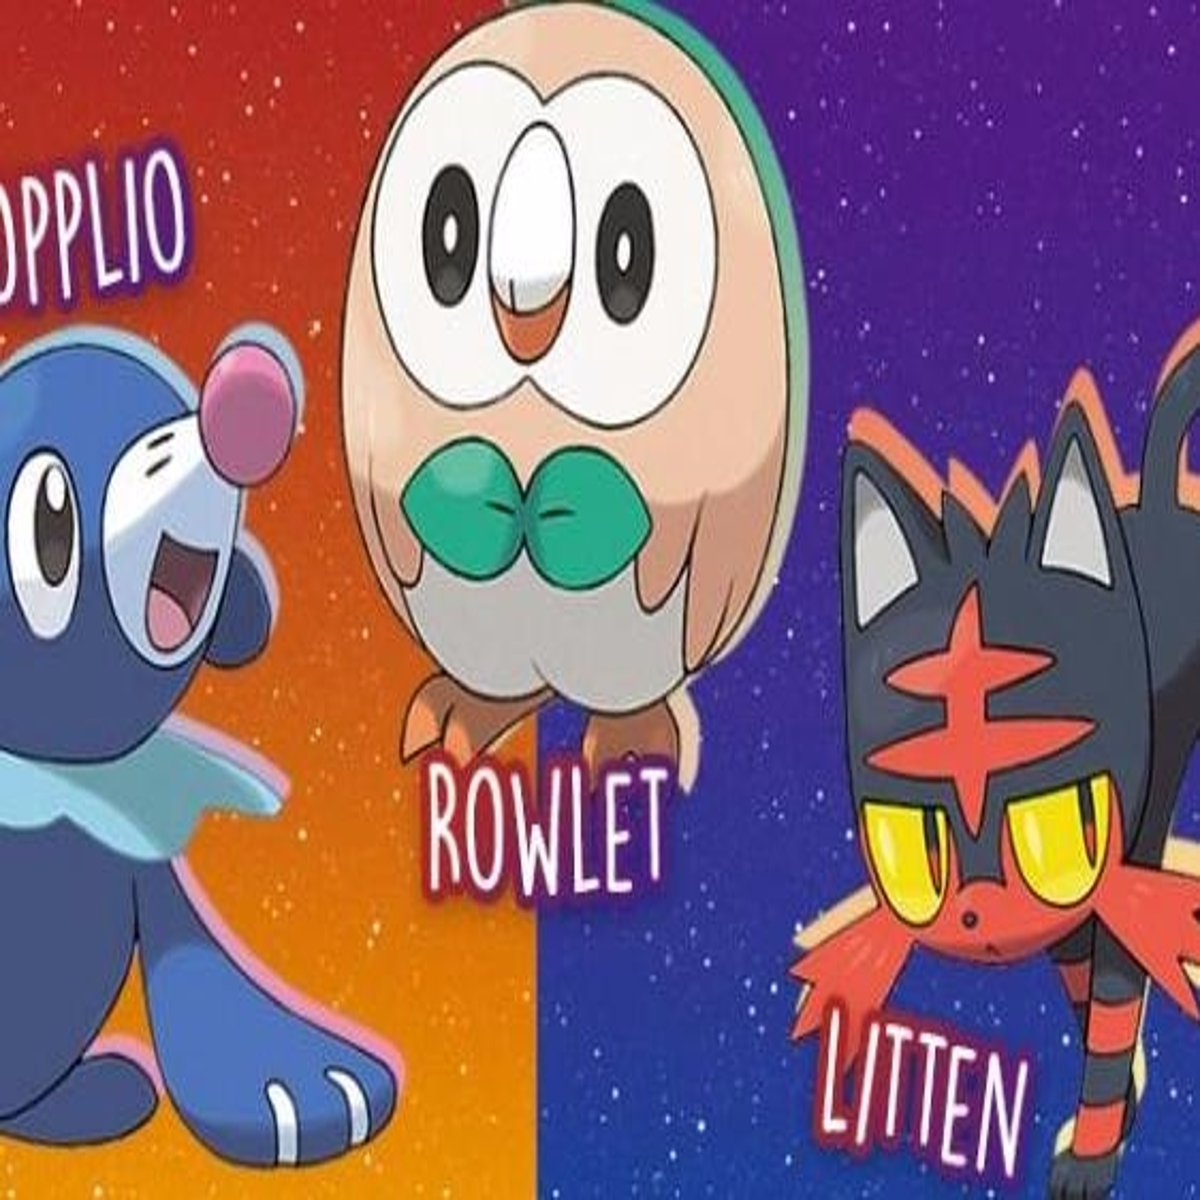 The Starter Pokemon and Their Exclusive Moves: An Analysis